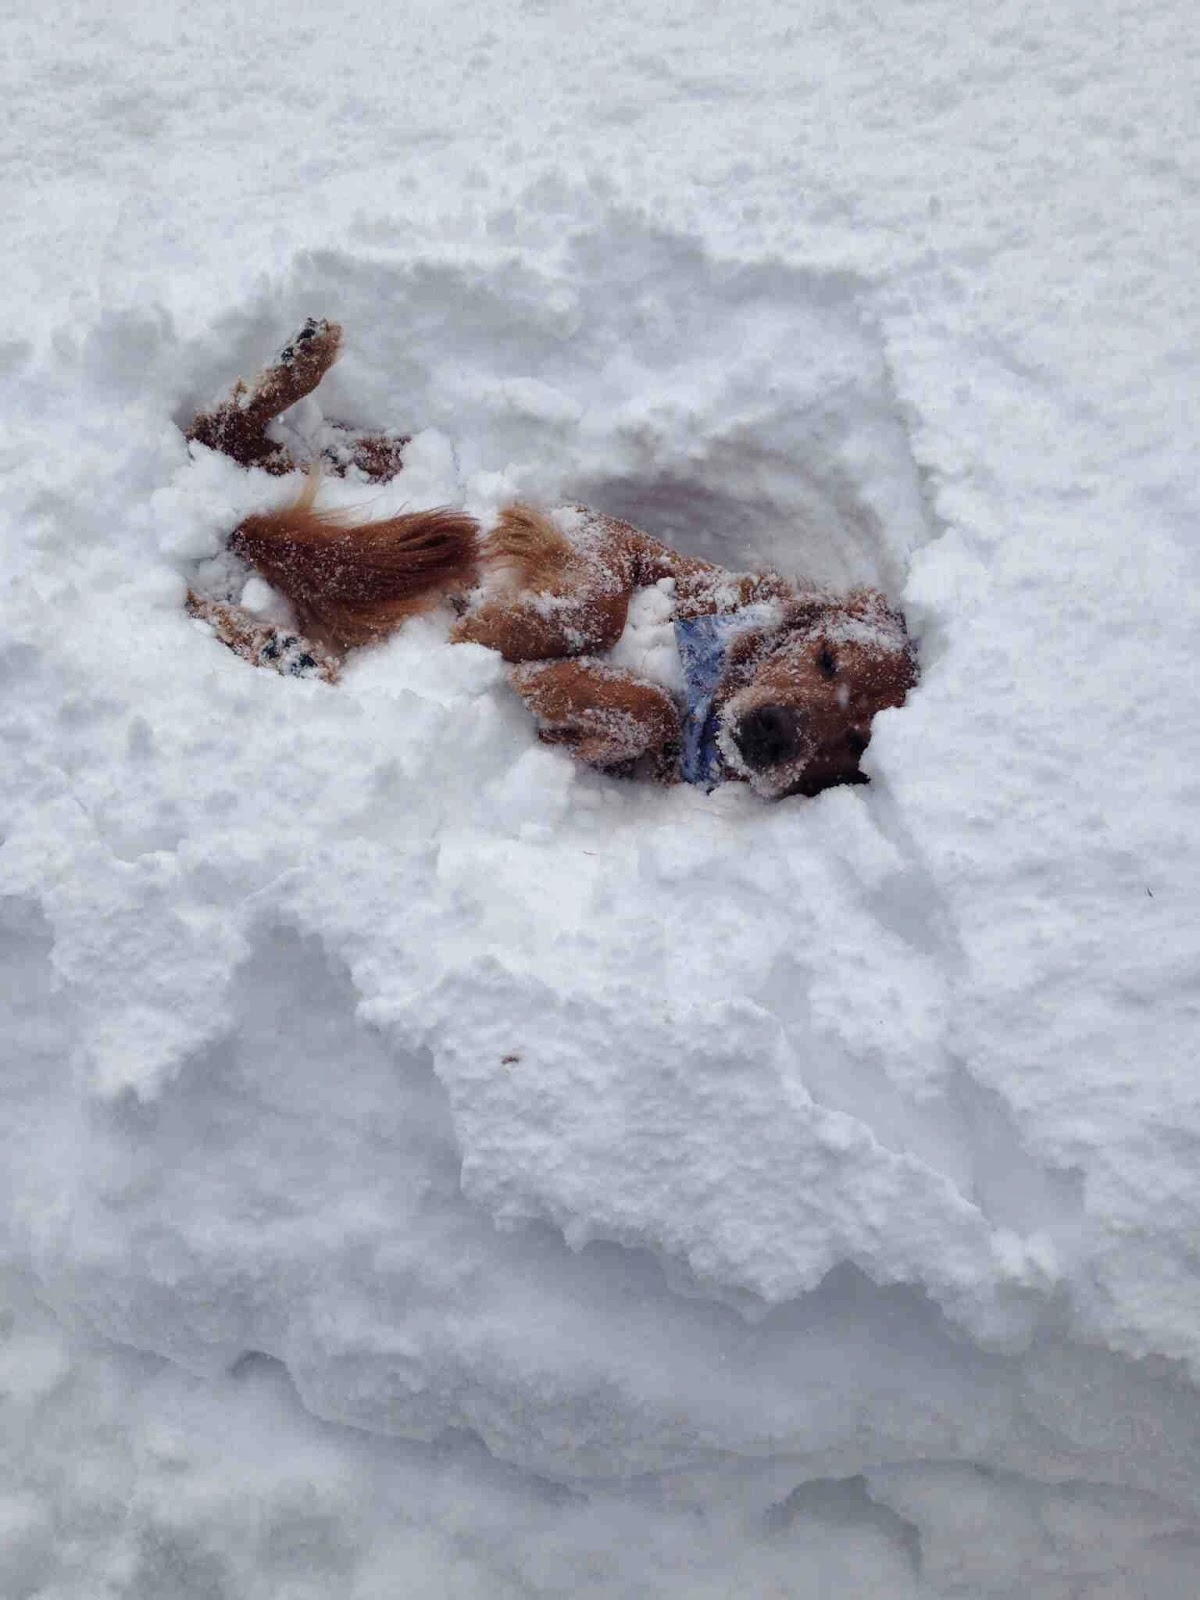 Cute dogs - part 8 (50 pics), dog playing in the snow